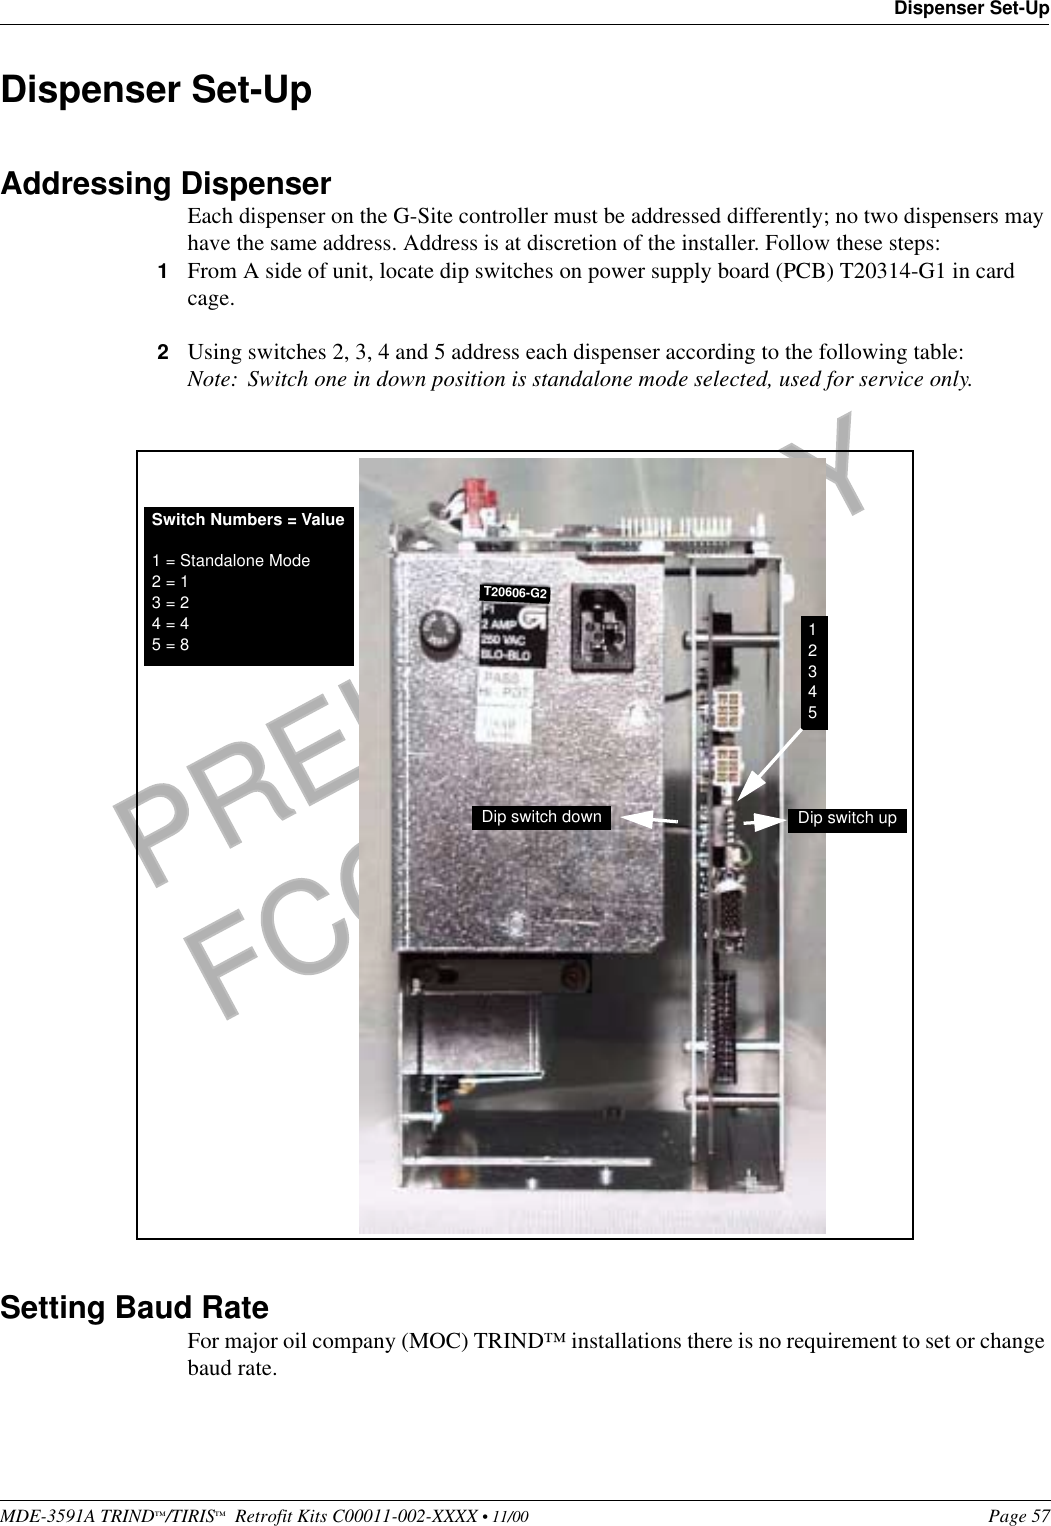 MDE-3591A TRIND™/TIRIS™  Retrofit Kits C00011-002-XXXX • 11/00 Page 57Dispenser Set-UpPRELIMINARYFCC 11/30Dispenser Set-UpAddressing DispenserEach dispenser on the G-Site controller must be addressed differently; no two dispensers may have the same address. Address is at discretion of the installer. Follow these steps:1From A side of unit, locate dip switches on power supply board (PCB) T20314-G1 in card cage.2Using switches 2, 3, 4 and 5 address each dispenser according to the following table:Note: Switch one in down position is standalone mode selected, used for service only.Setting Baud RateFor major oil company (MOC) TRIND™ installations there is no requirement to set or change baud rate.Switch Numbers = Value1 = Standalone Mode2 = 13 = 24 = 45 = 8 12345Dip switch down Dip switch upT20606-G2